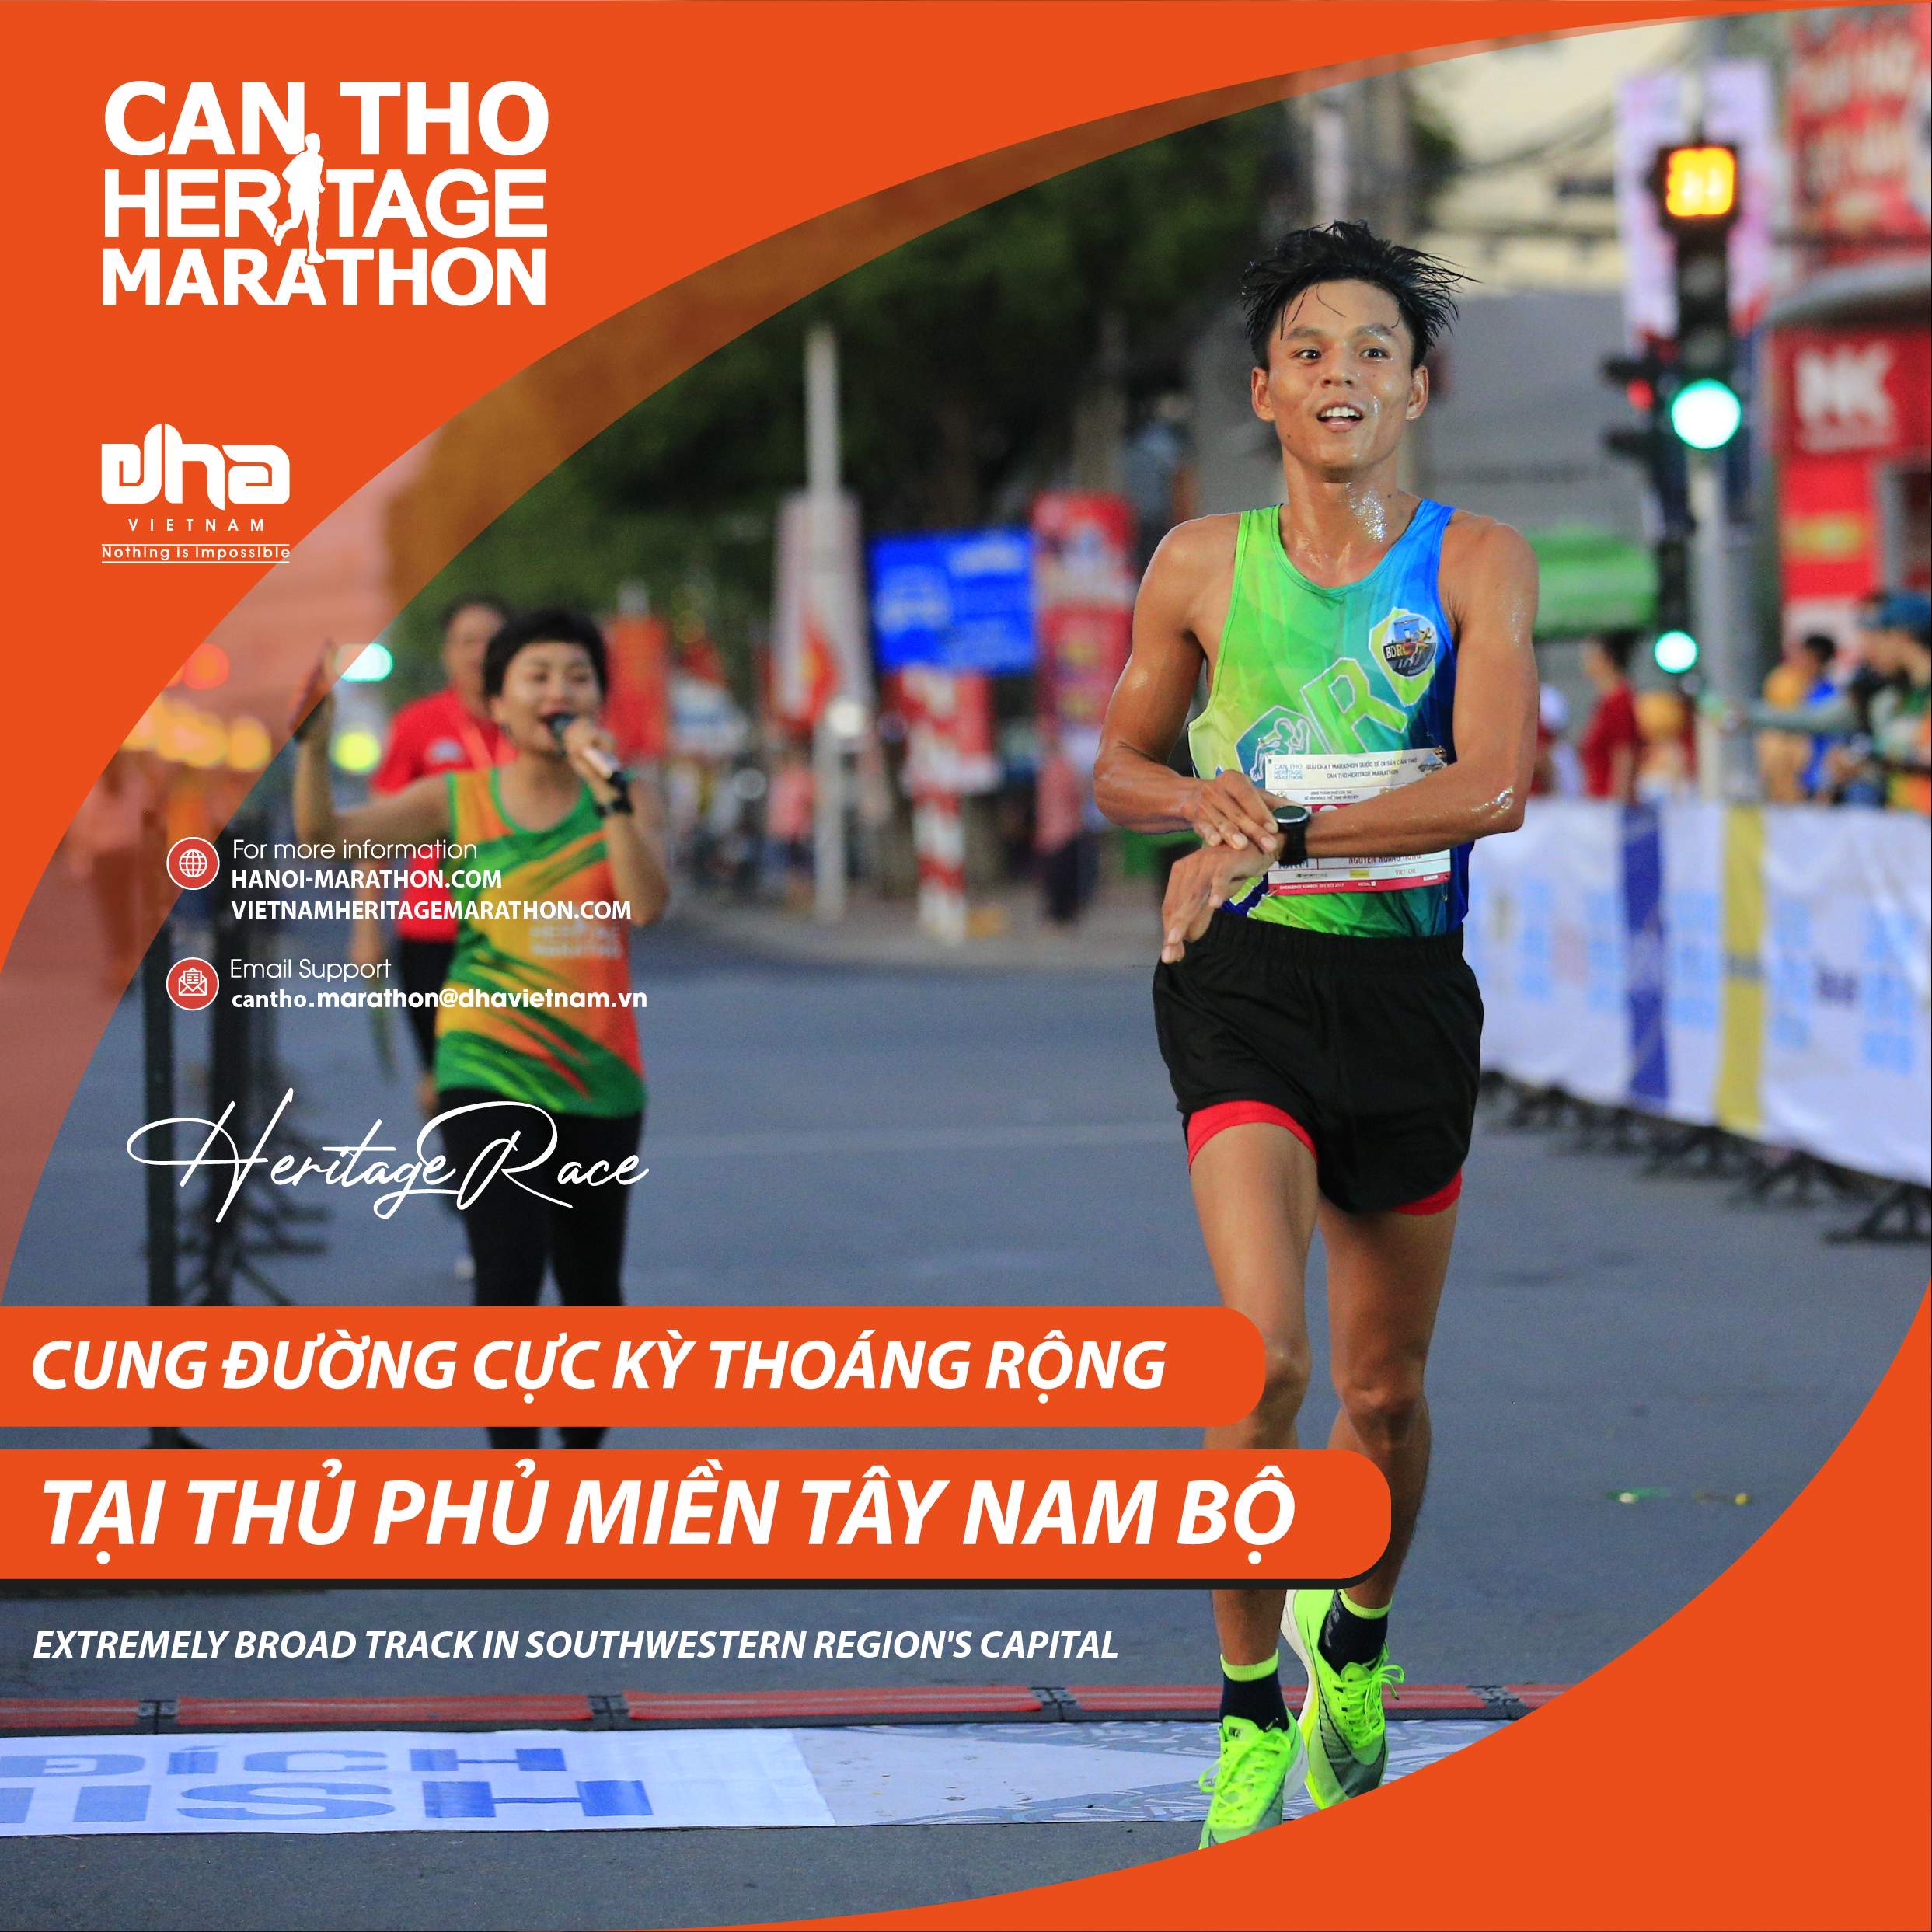 Can Tho Marathon - A Heritage Race 2022 Has Broad Track